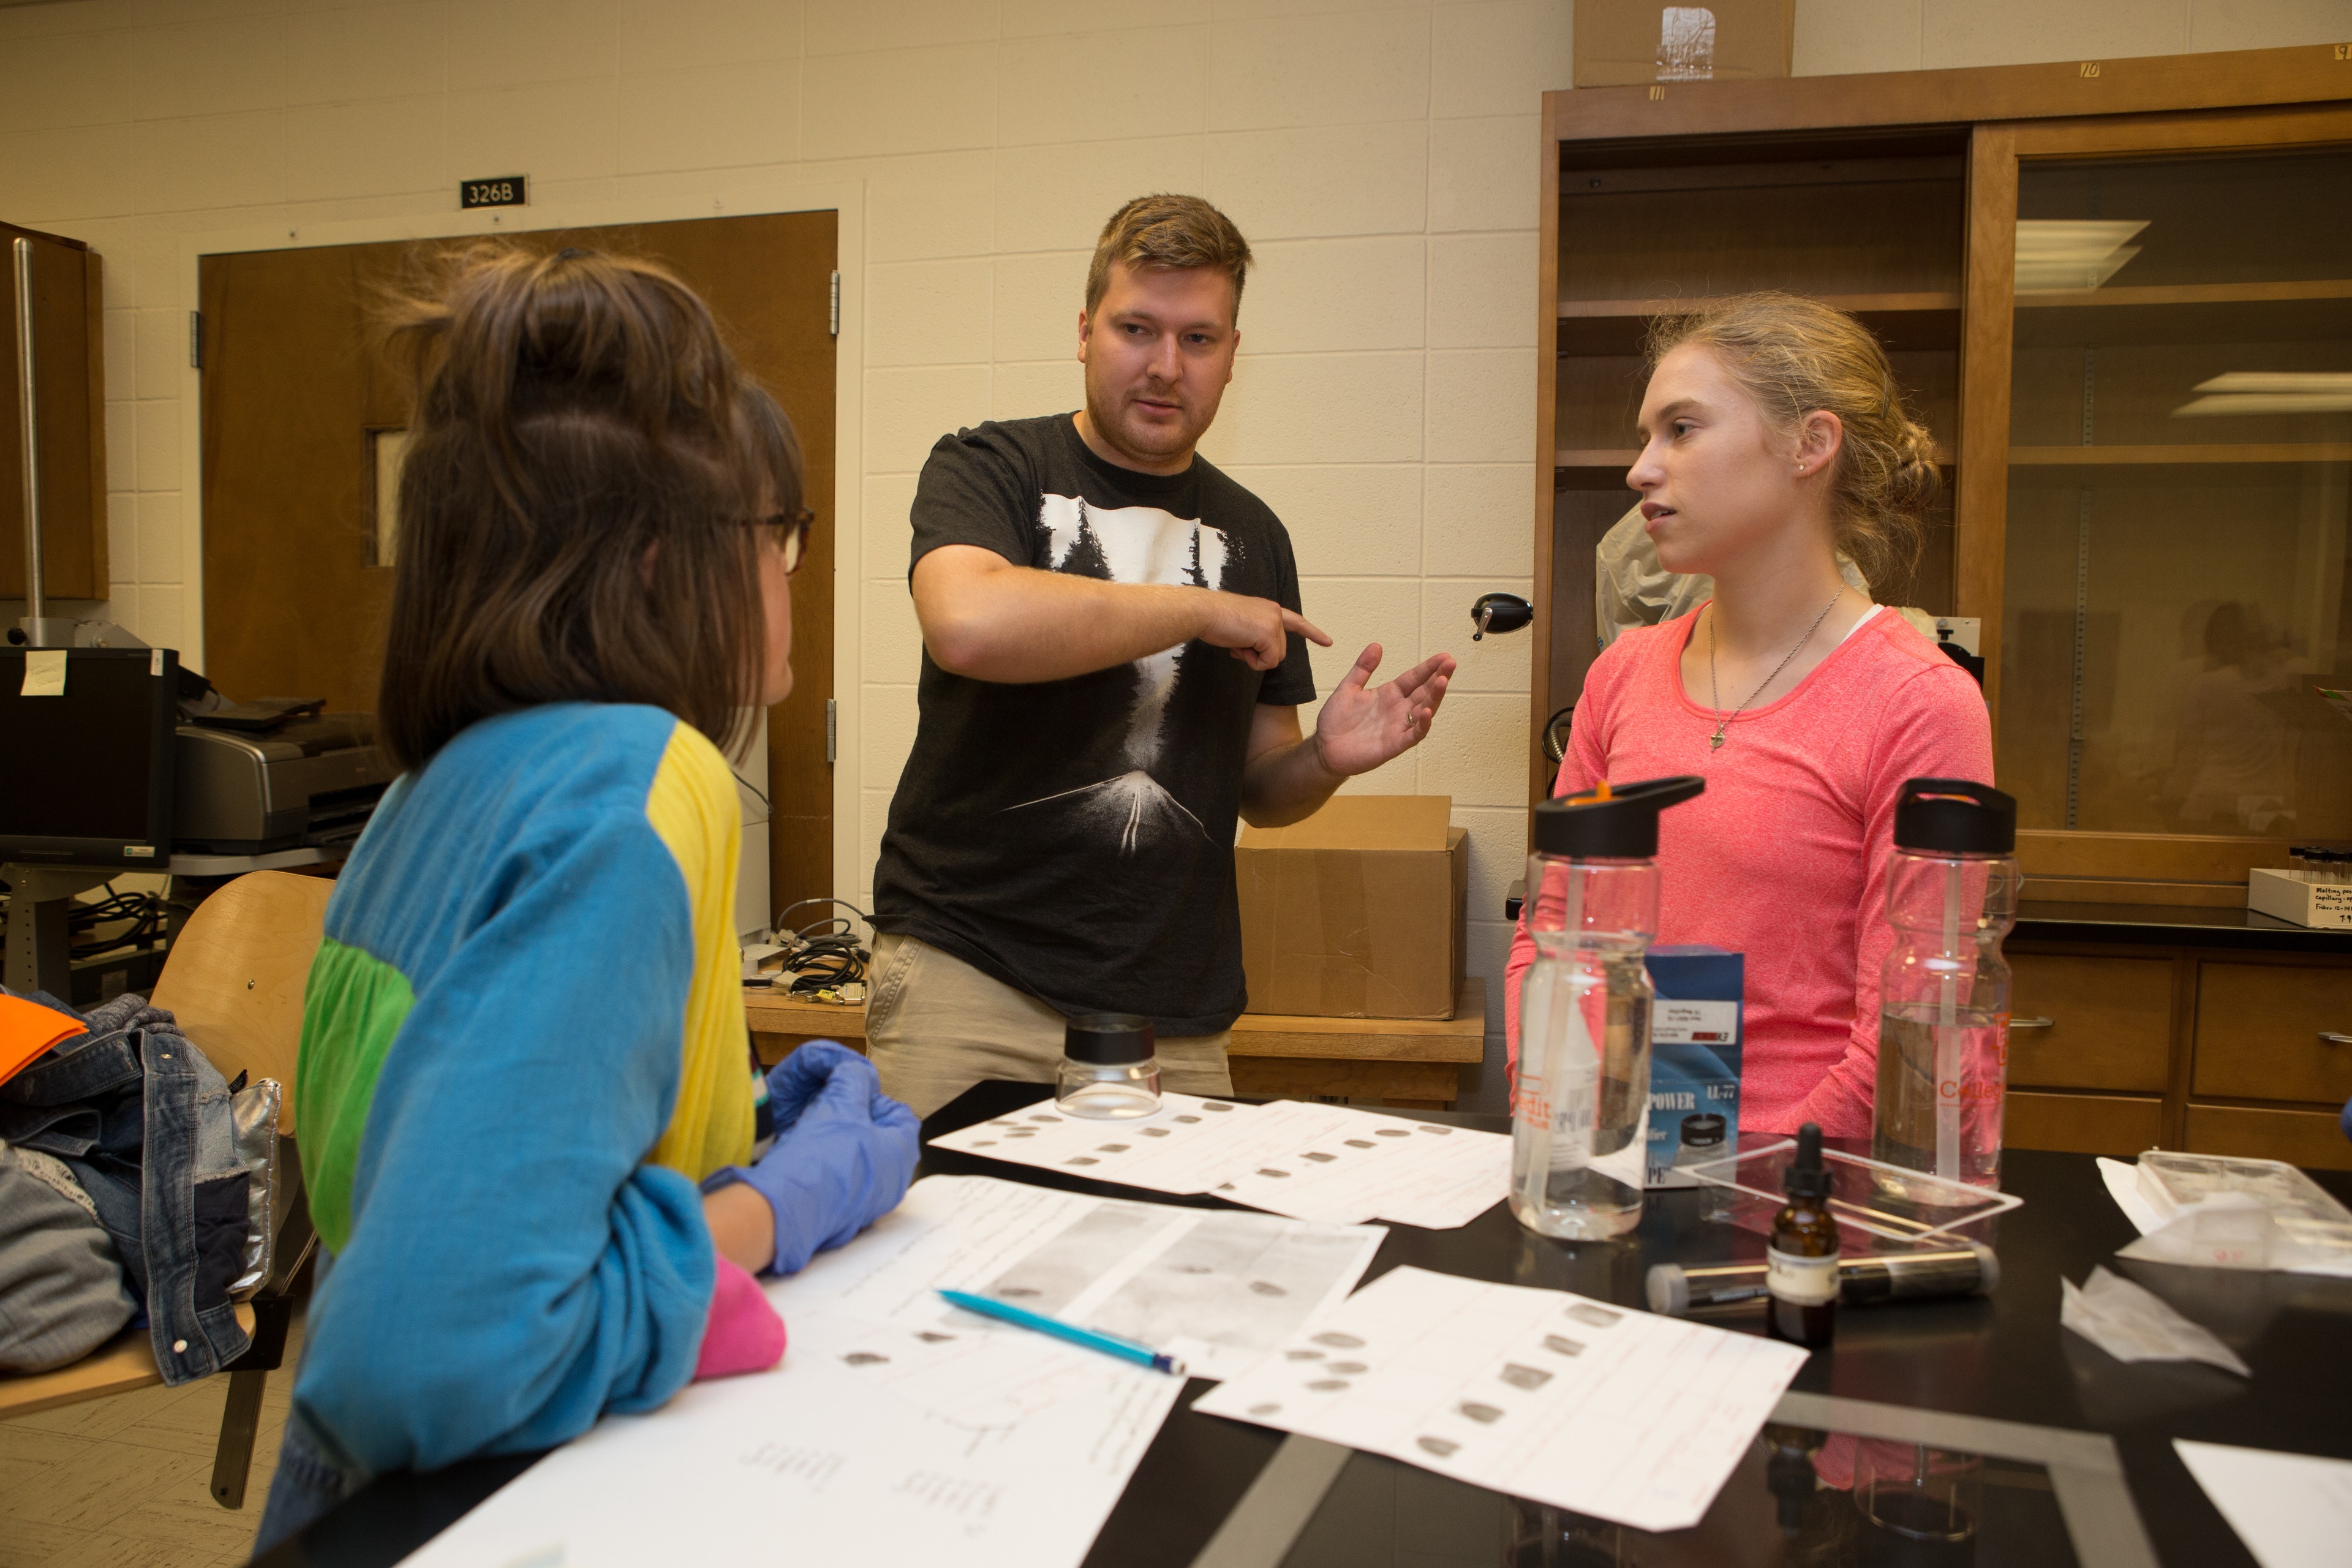 BGSU Forensic Science Majors, specializing in forensic examination, in the campus lab study fingerprints.